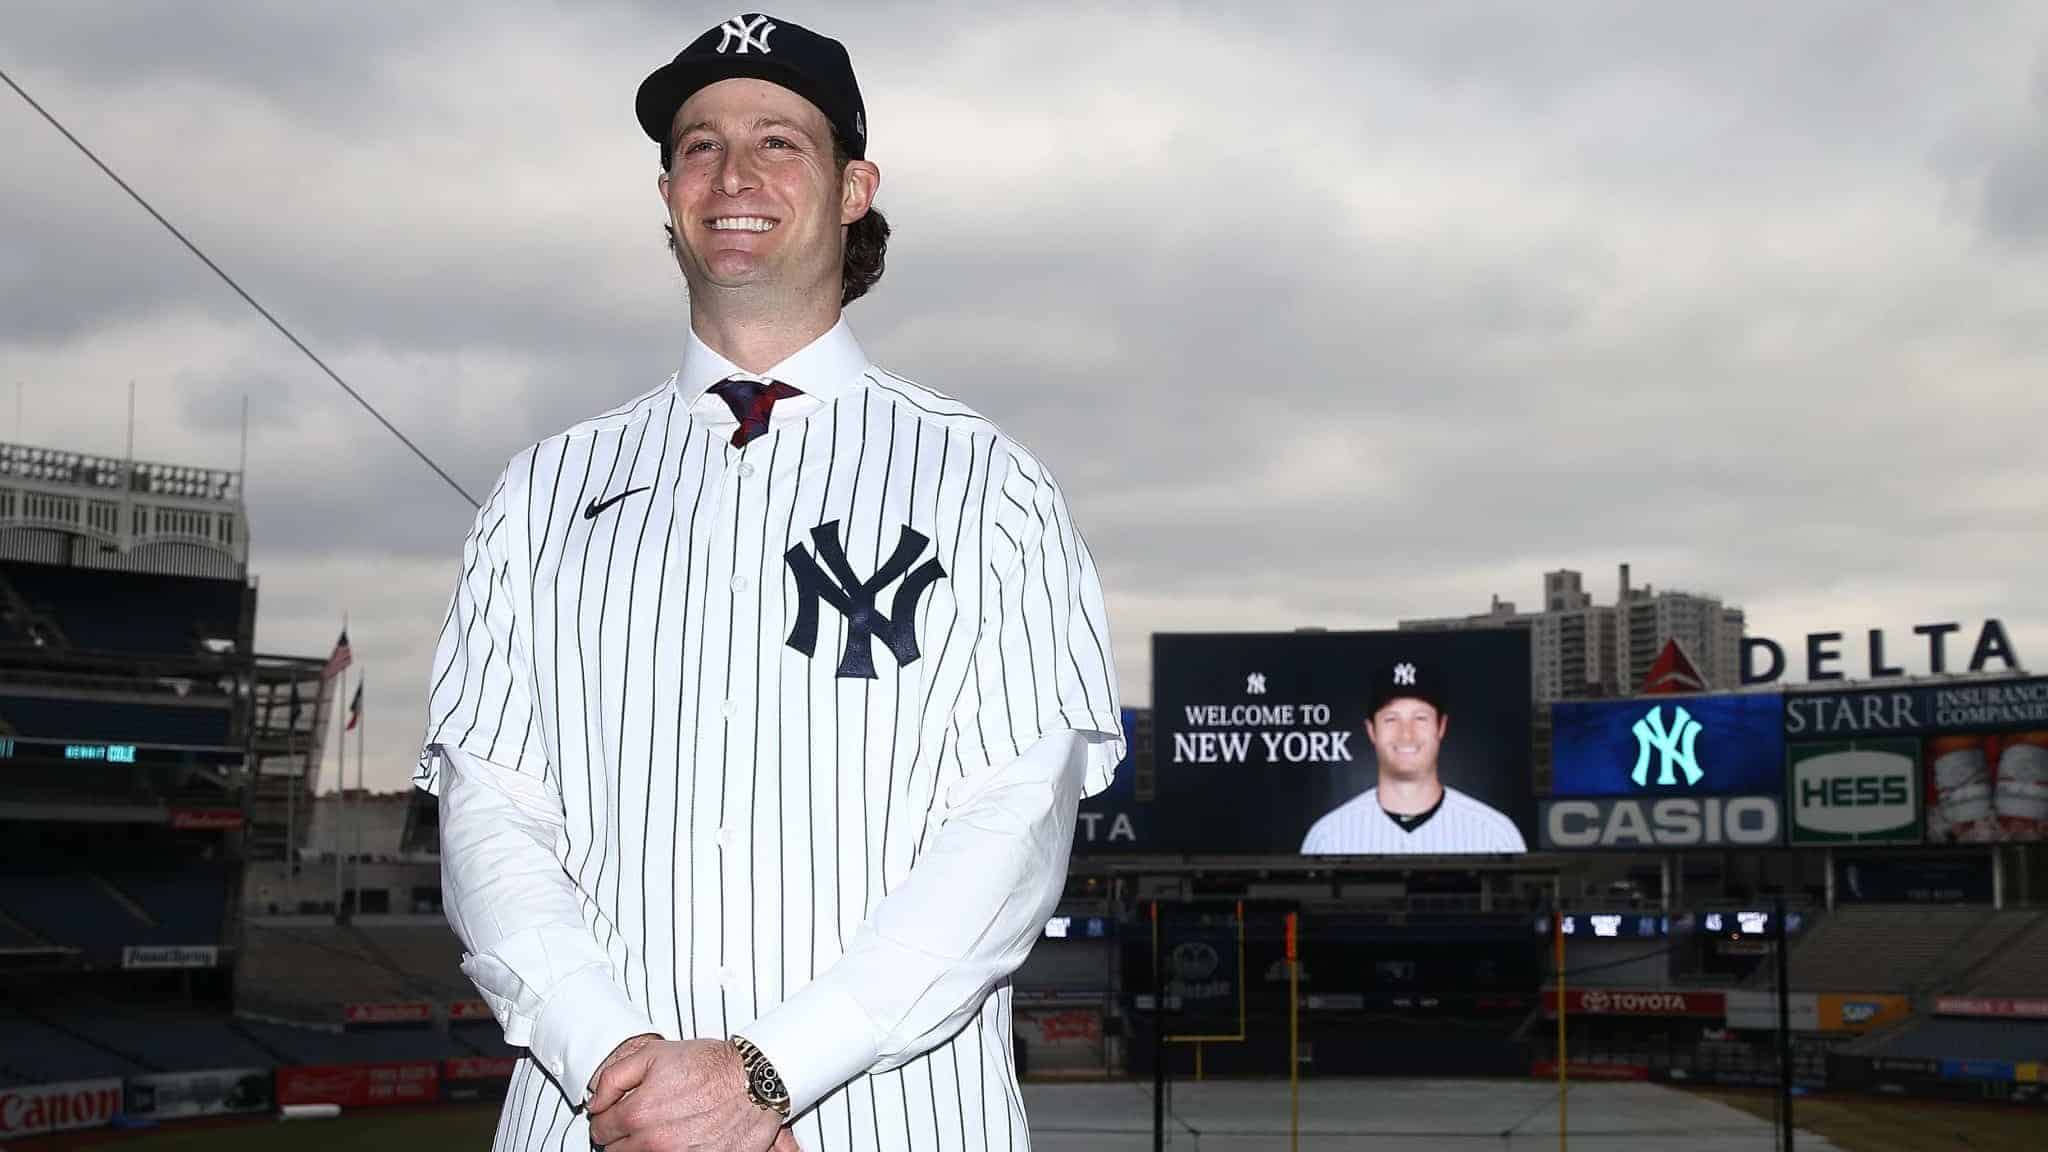 NEW YORK, NEW YORK - DECEMBER 18: Gerrit Cole pose for a photo at Yankee Stadium during a press conference at Yankee Stadium on December 18, 2019 in New York City.